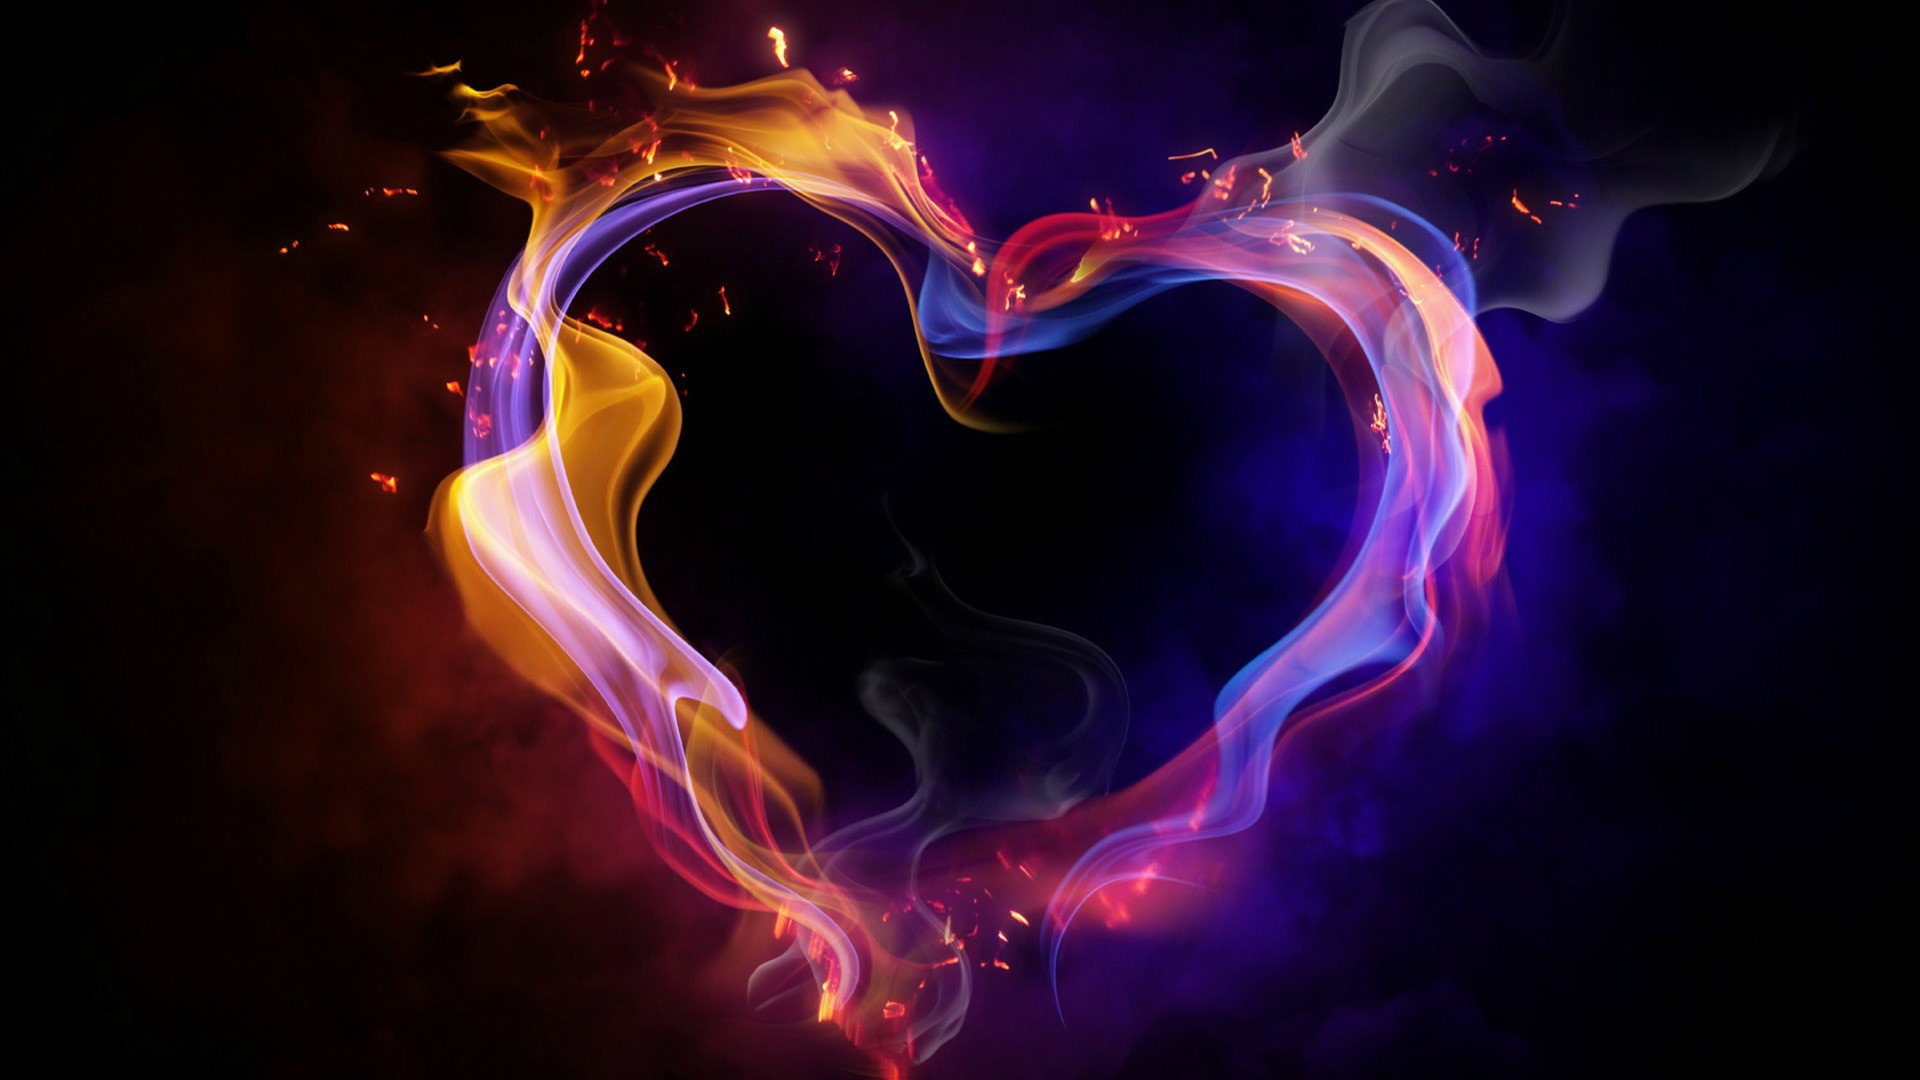 HD Cool Color Abstract Heart Desktop Wallpaper Background